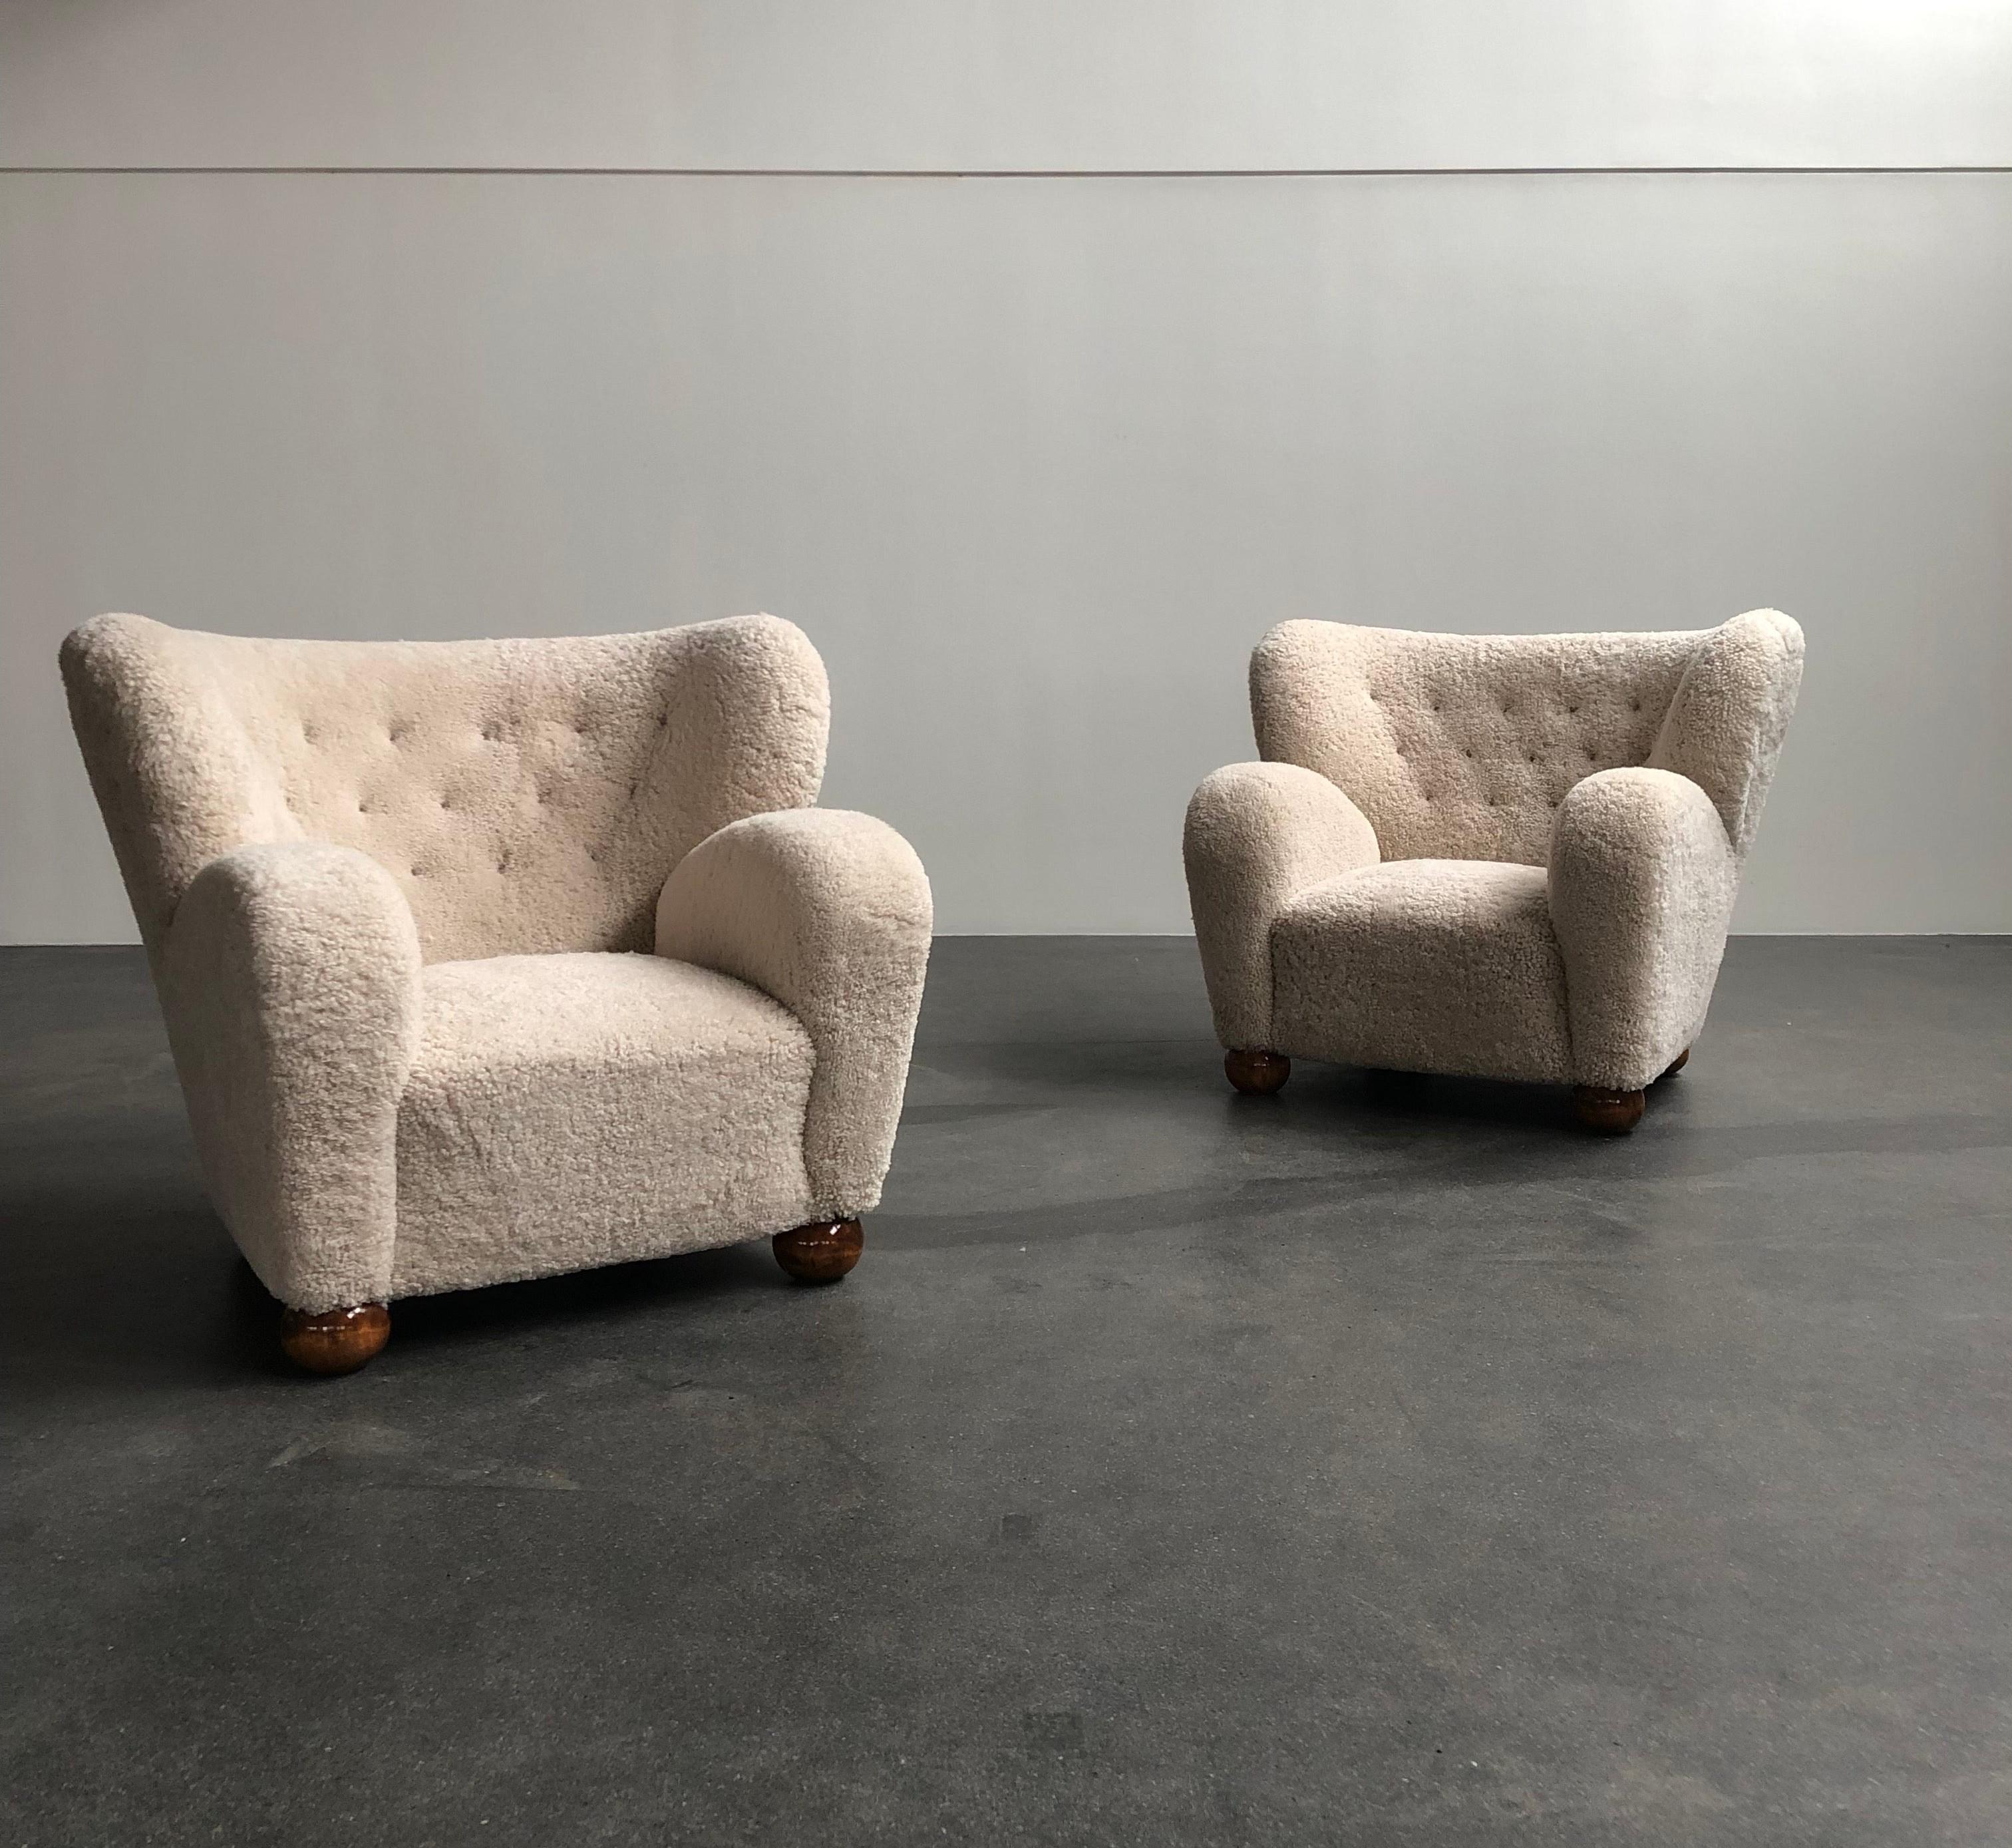 Pair of Märta Blomstedt easy chairs. Legs in stained ash and upholstered in sheepskin. Model designed for Hotel Aulanko, Finland, 1939.

The chairs are newly refinished an upholstered in sheepskin.

Price is for the pair.
